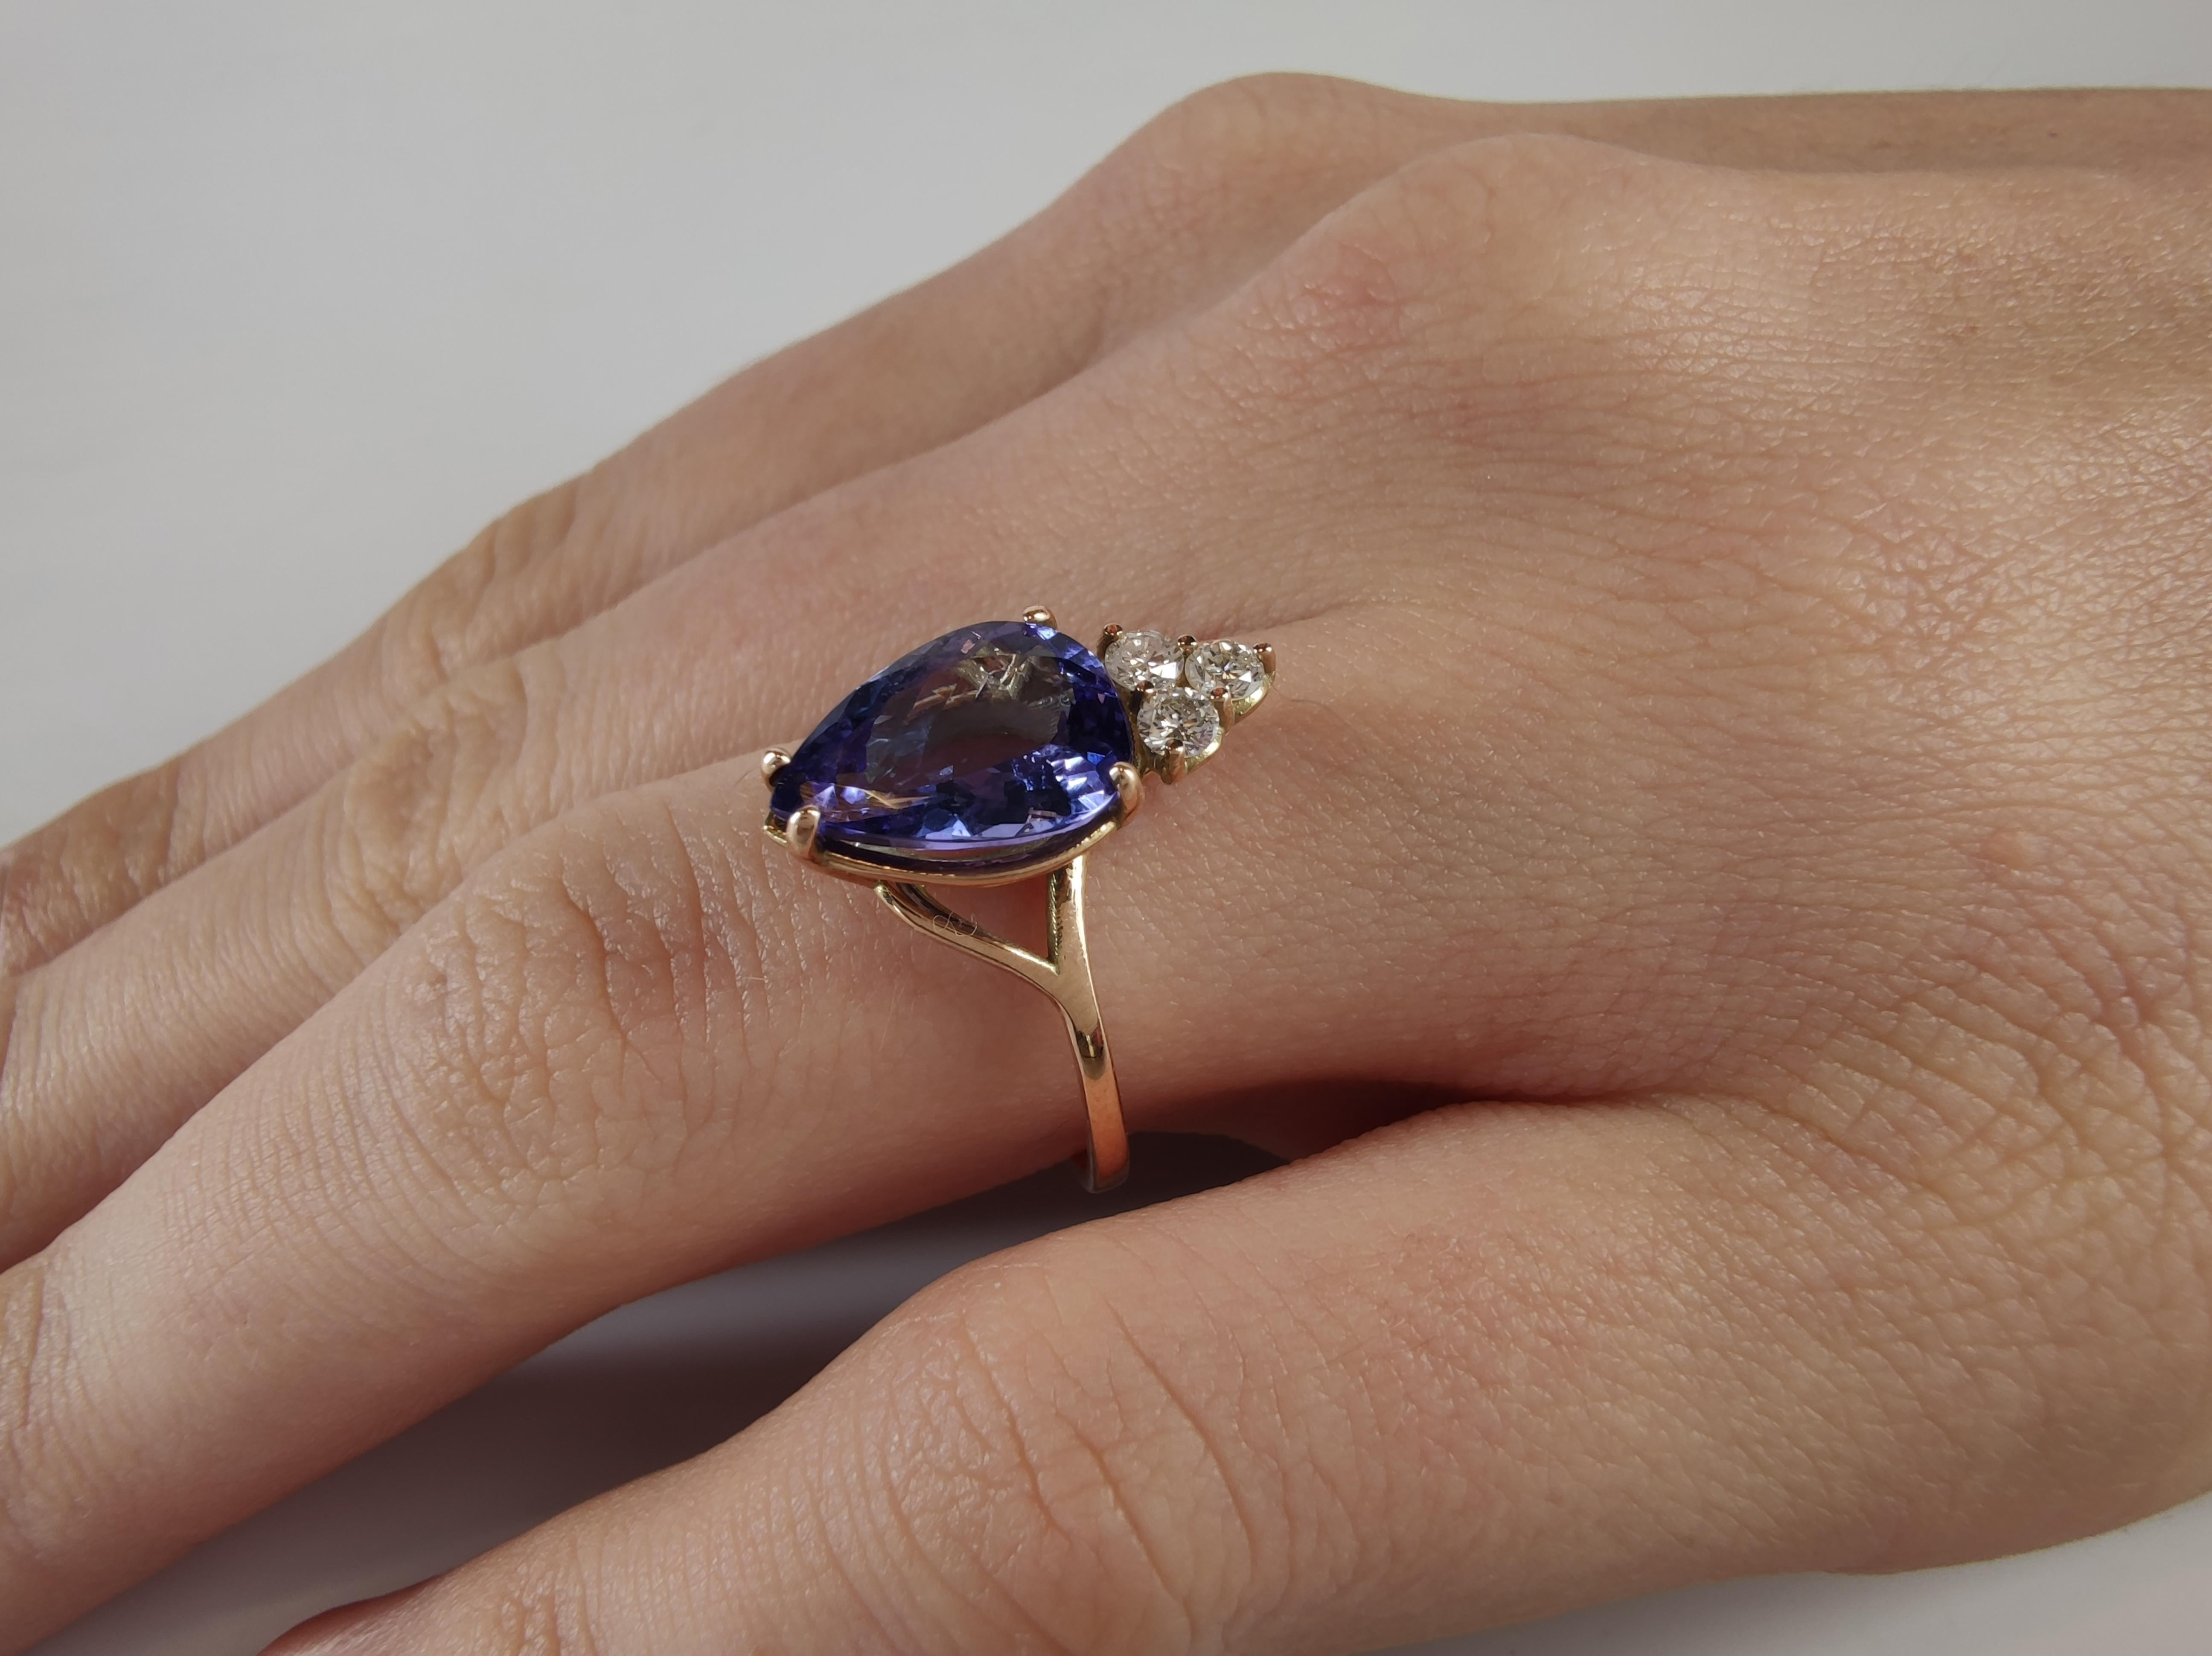 Discover the allure of Tanzanite, renowned for its breathtaking blue hue, rivaling even the finest sapphires. Embrace the opportunity to own this exquisite gemstone, hailed as 'the most beautiful blue stone discovered in 2000 years.' Explore its